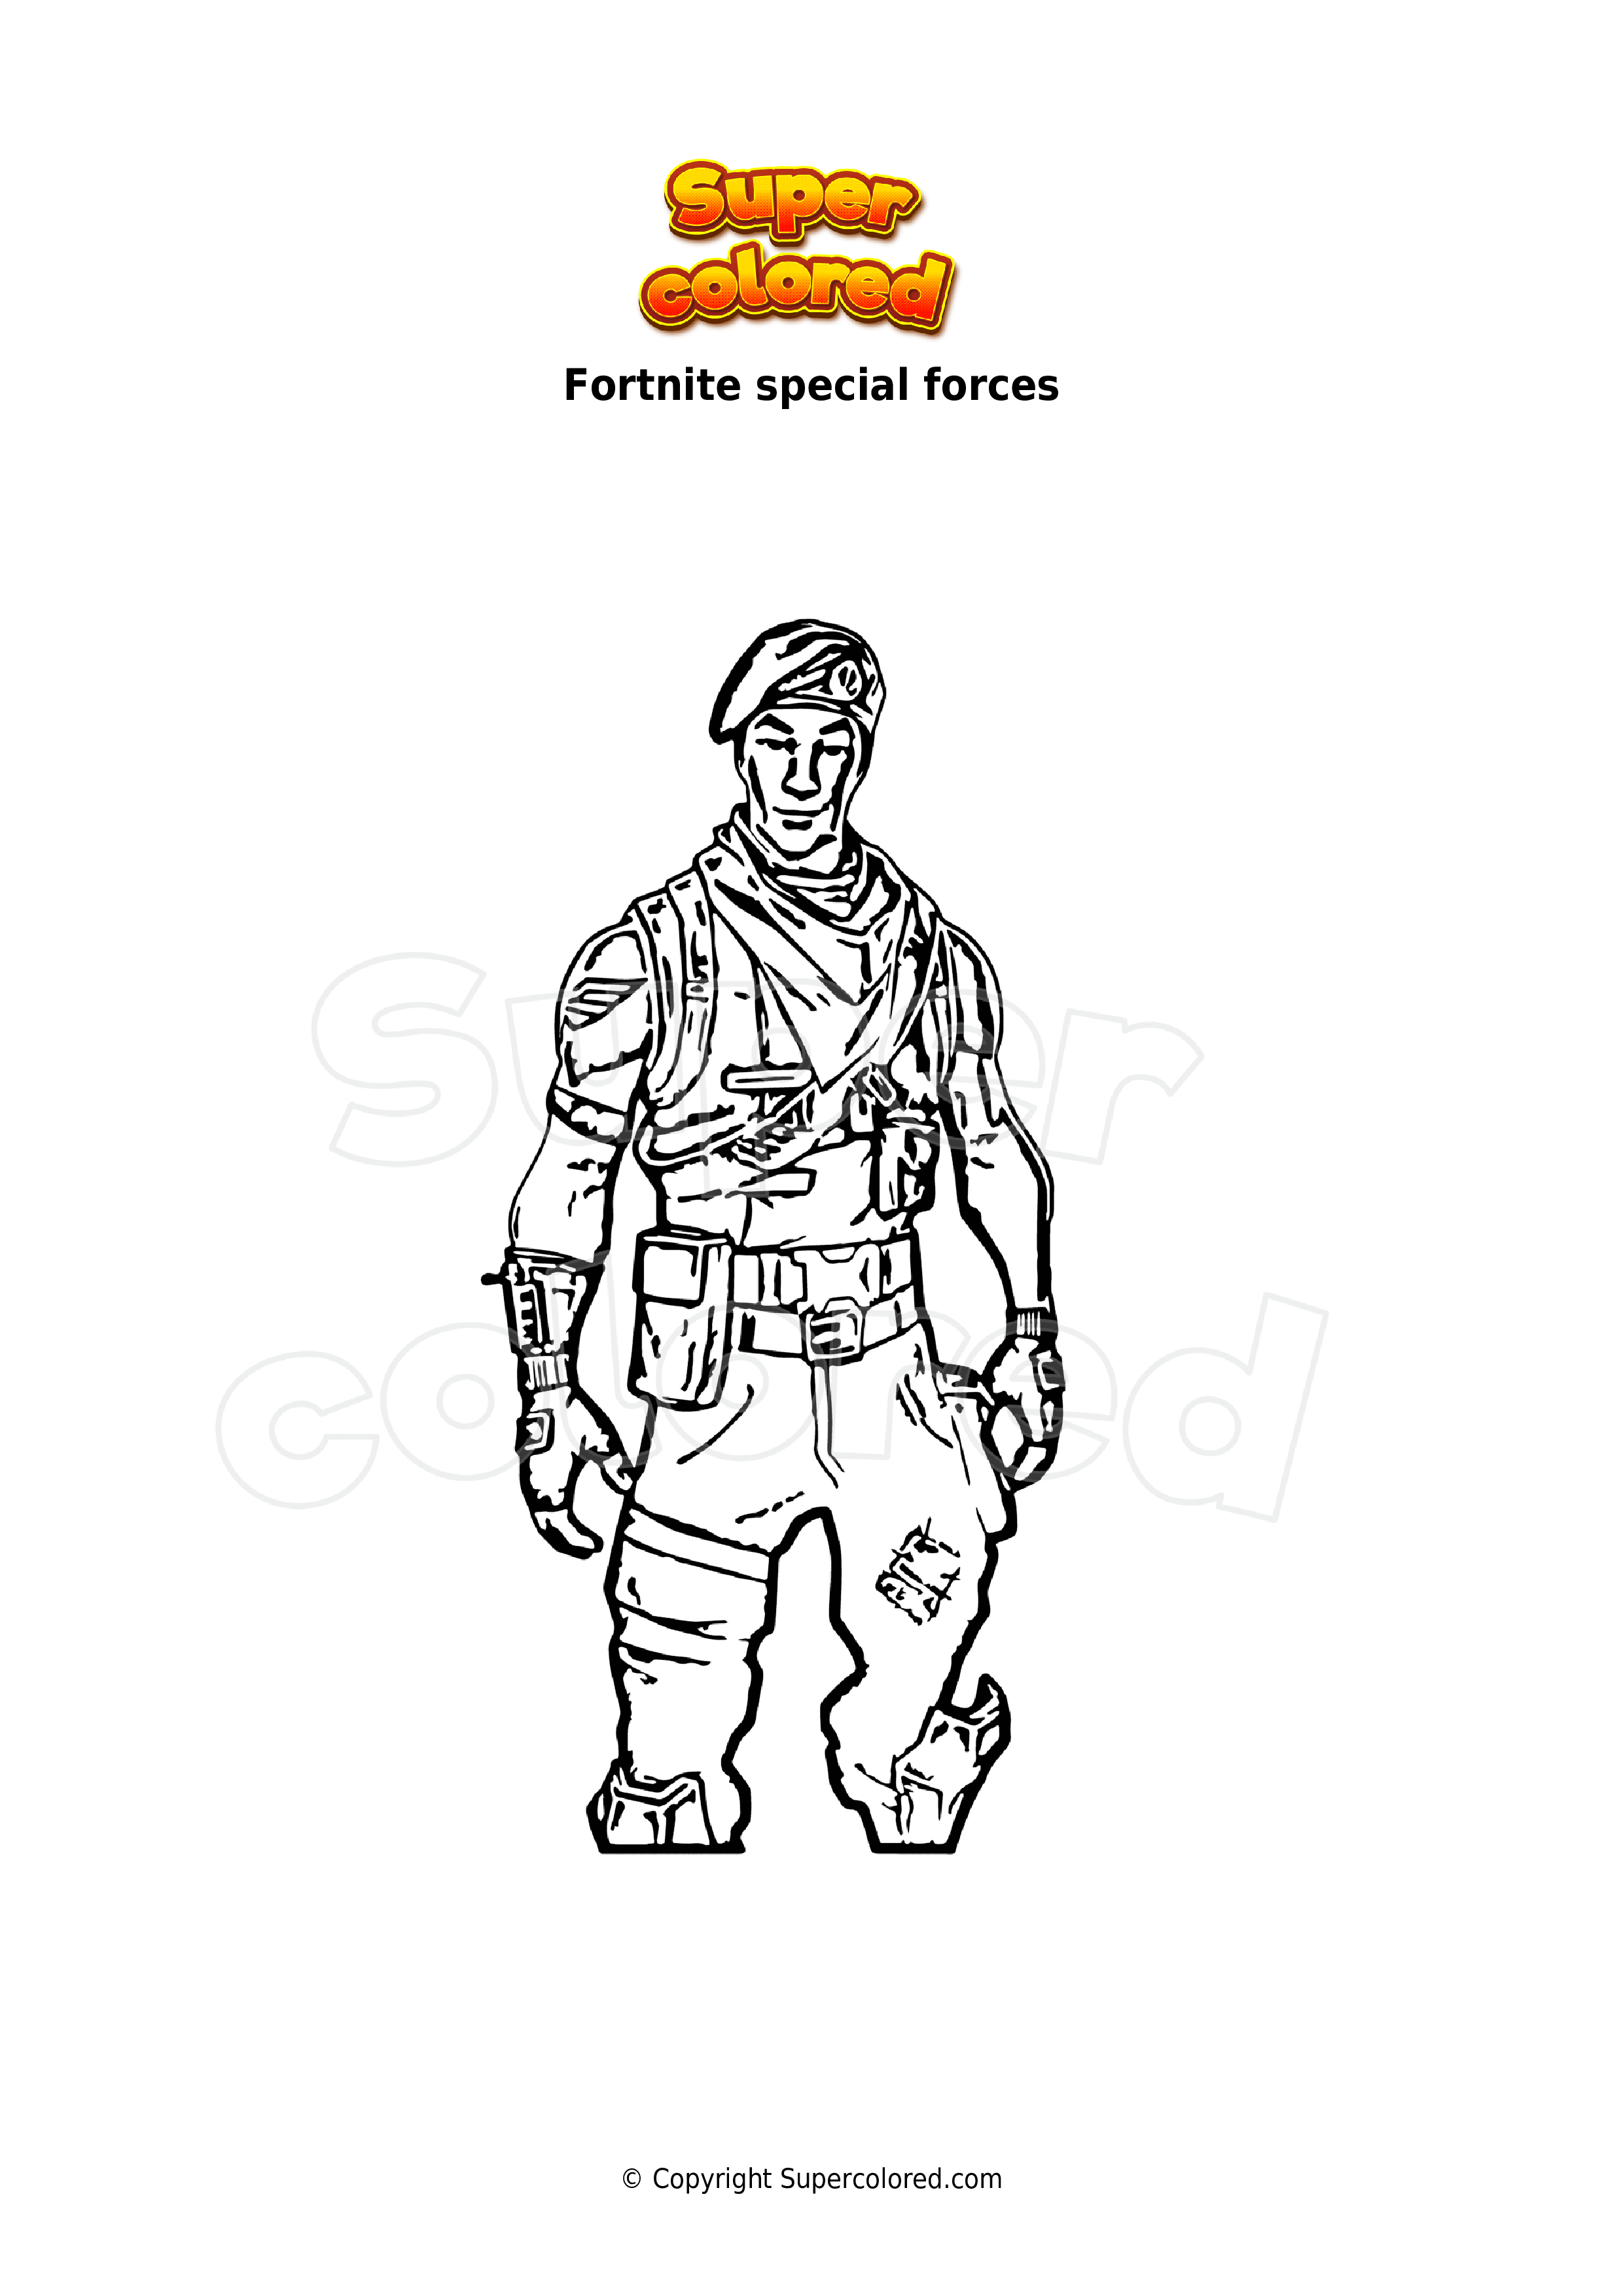 Coloriage Fortnite special forces - Supercolored.com